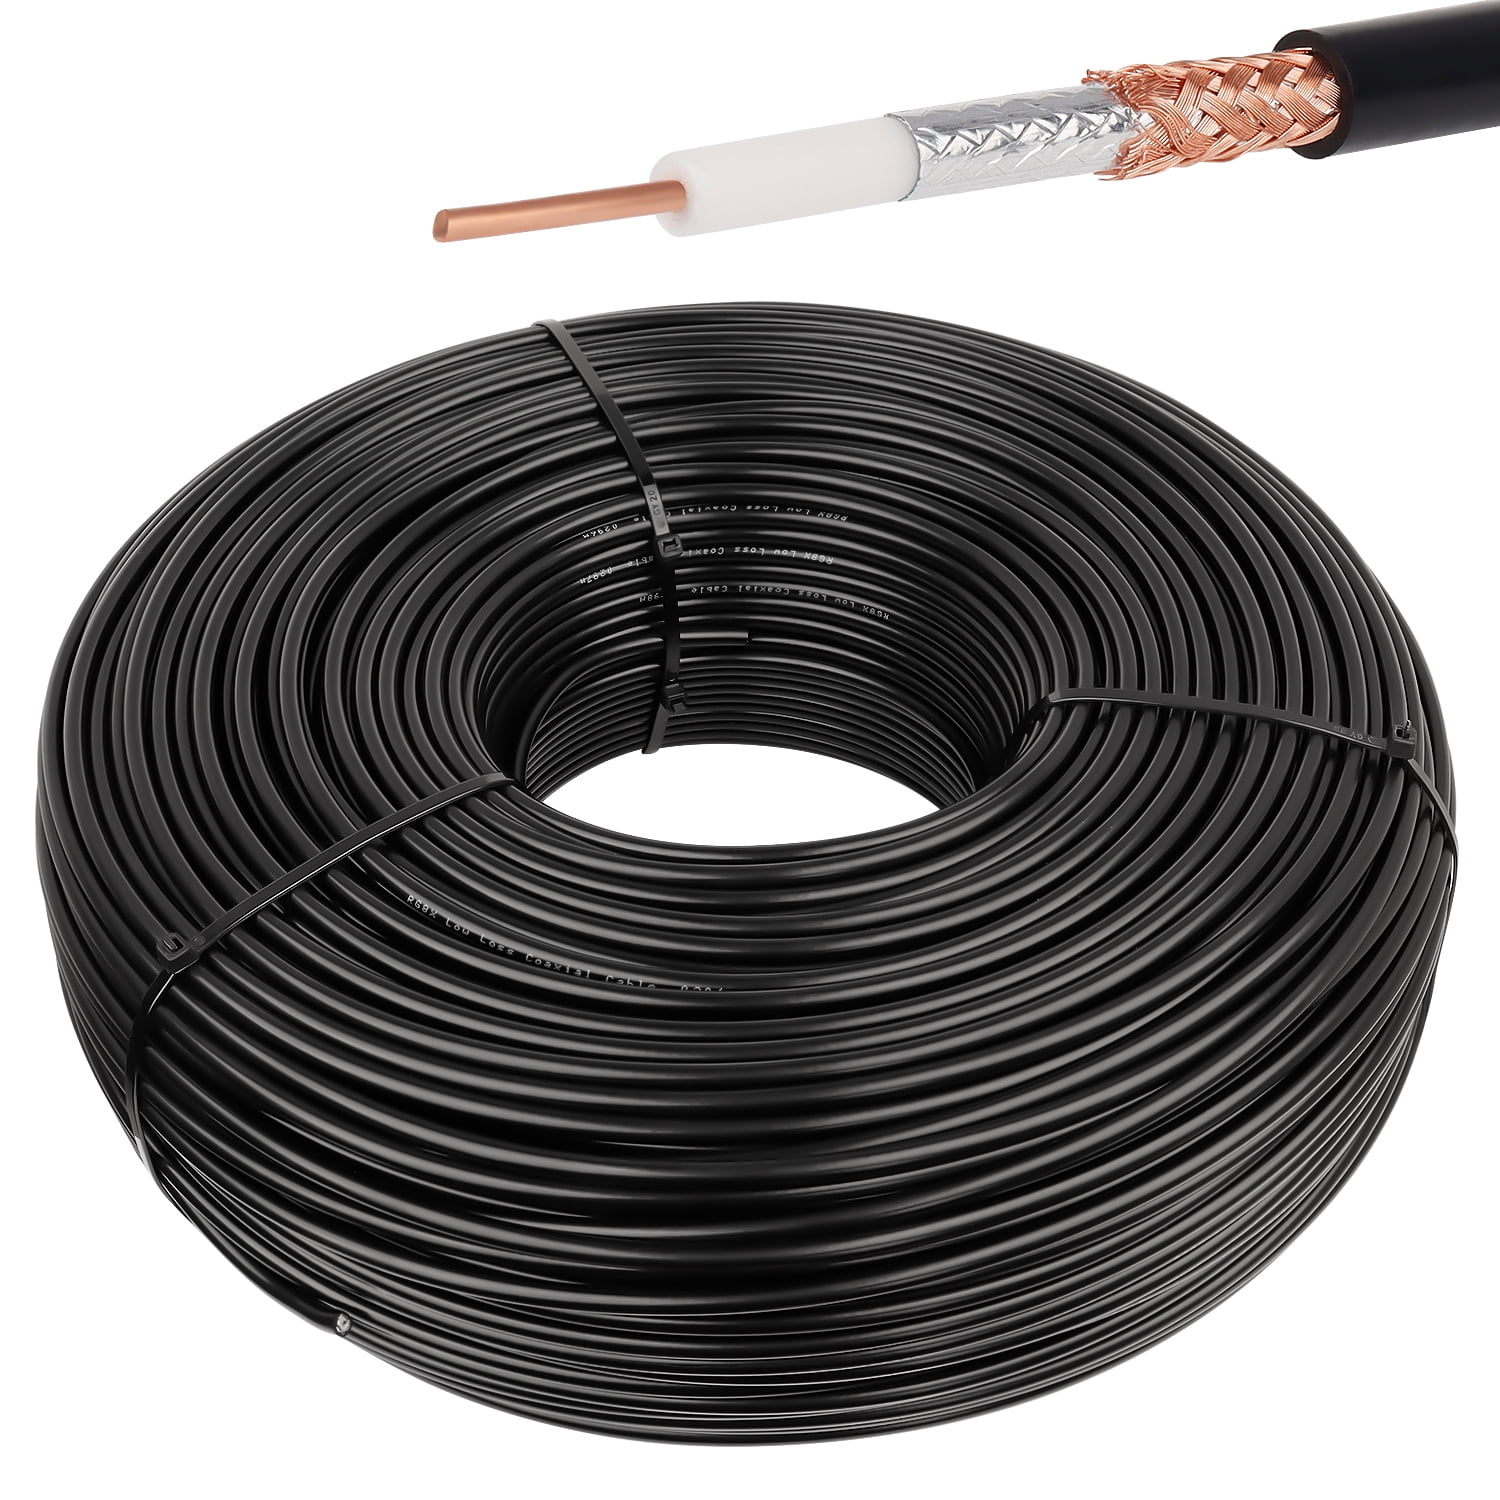 RG8X Extension Cable 100ft, MOOKEERF Wired Wireless & Cable Cable Coaxial Network for Ohm Impedance Router Cable Pigtail 4G Flexible Antenna RF Loss Coax Black 50 Low RG8X